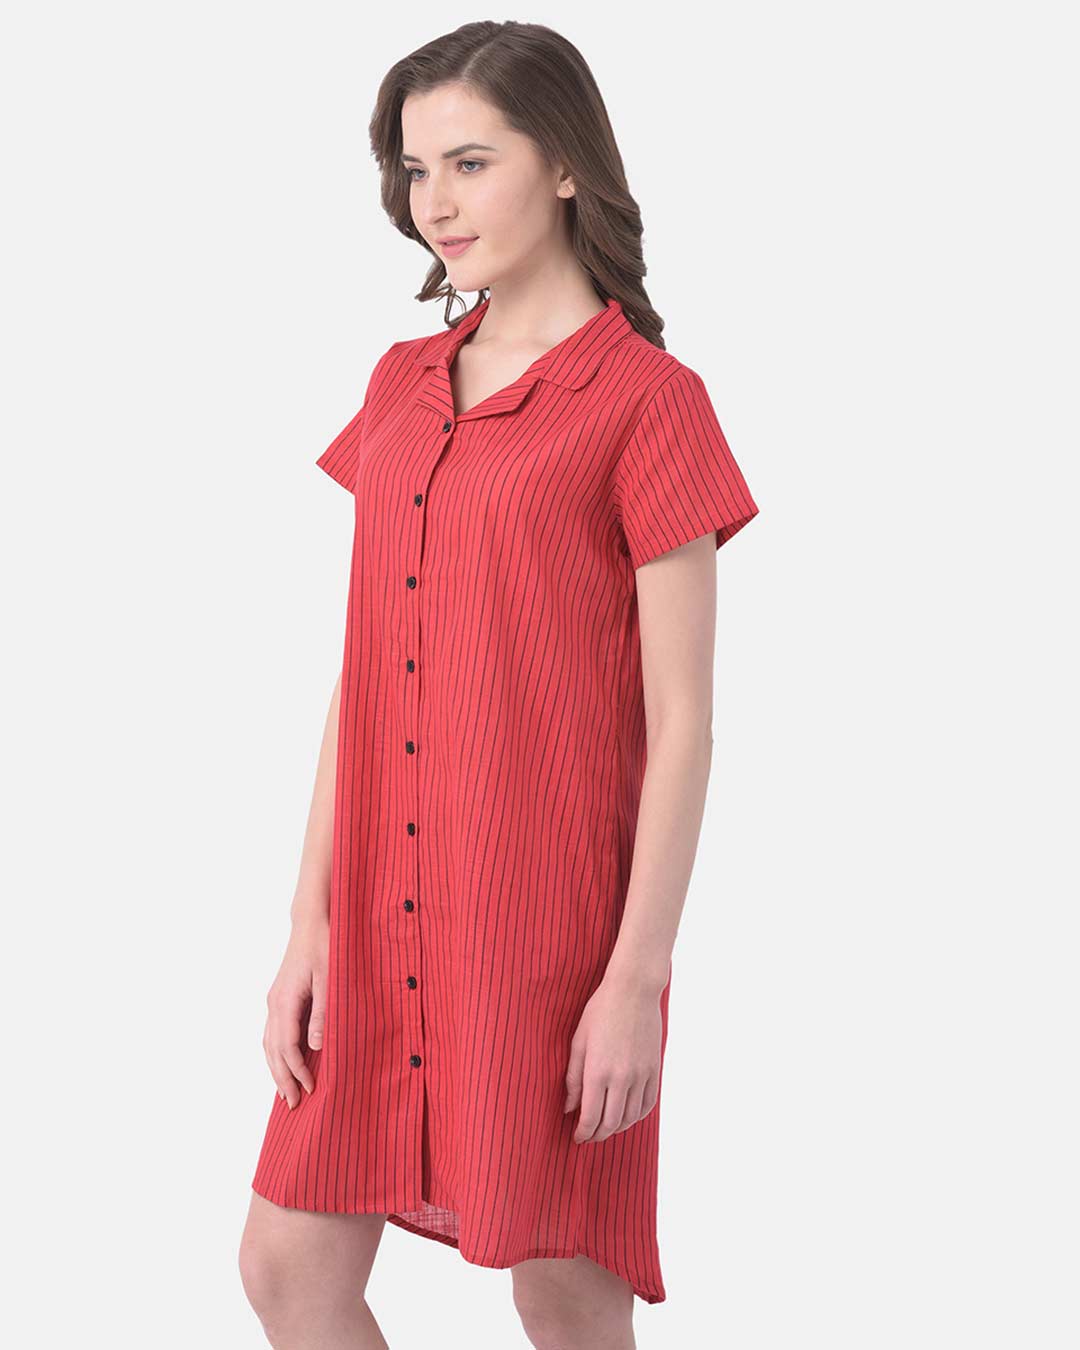 Shop Button Me Up Sassy Stripes Sleep Dressin Red  100% Cotton-Back